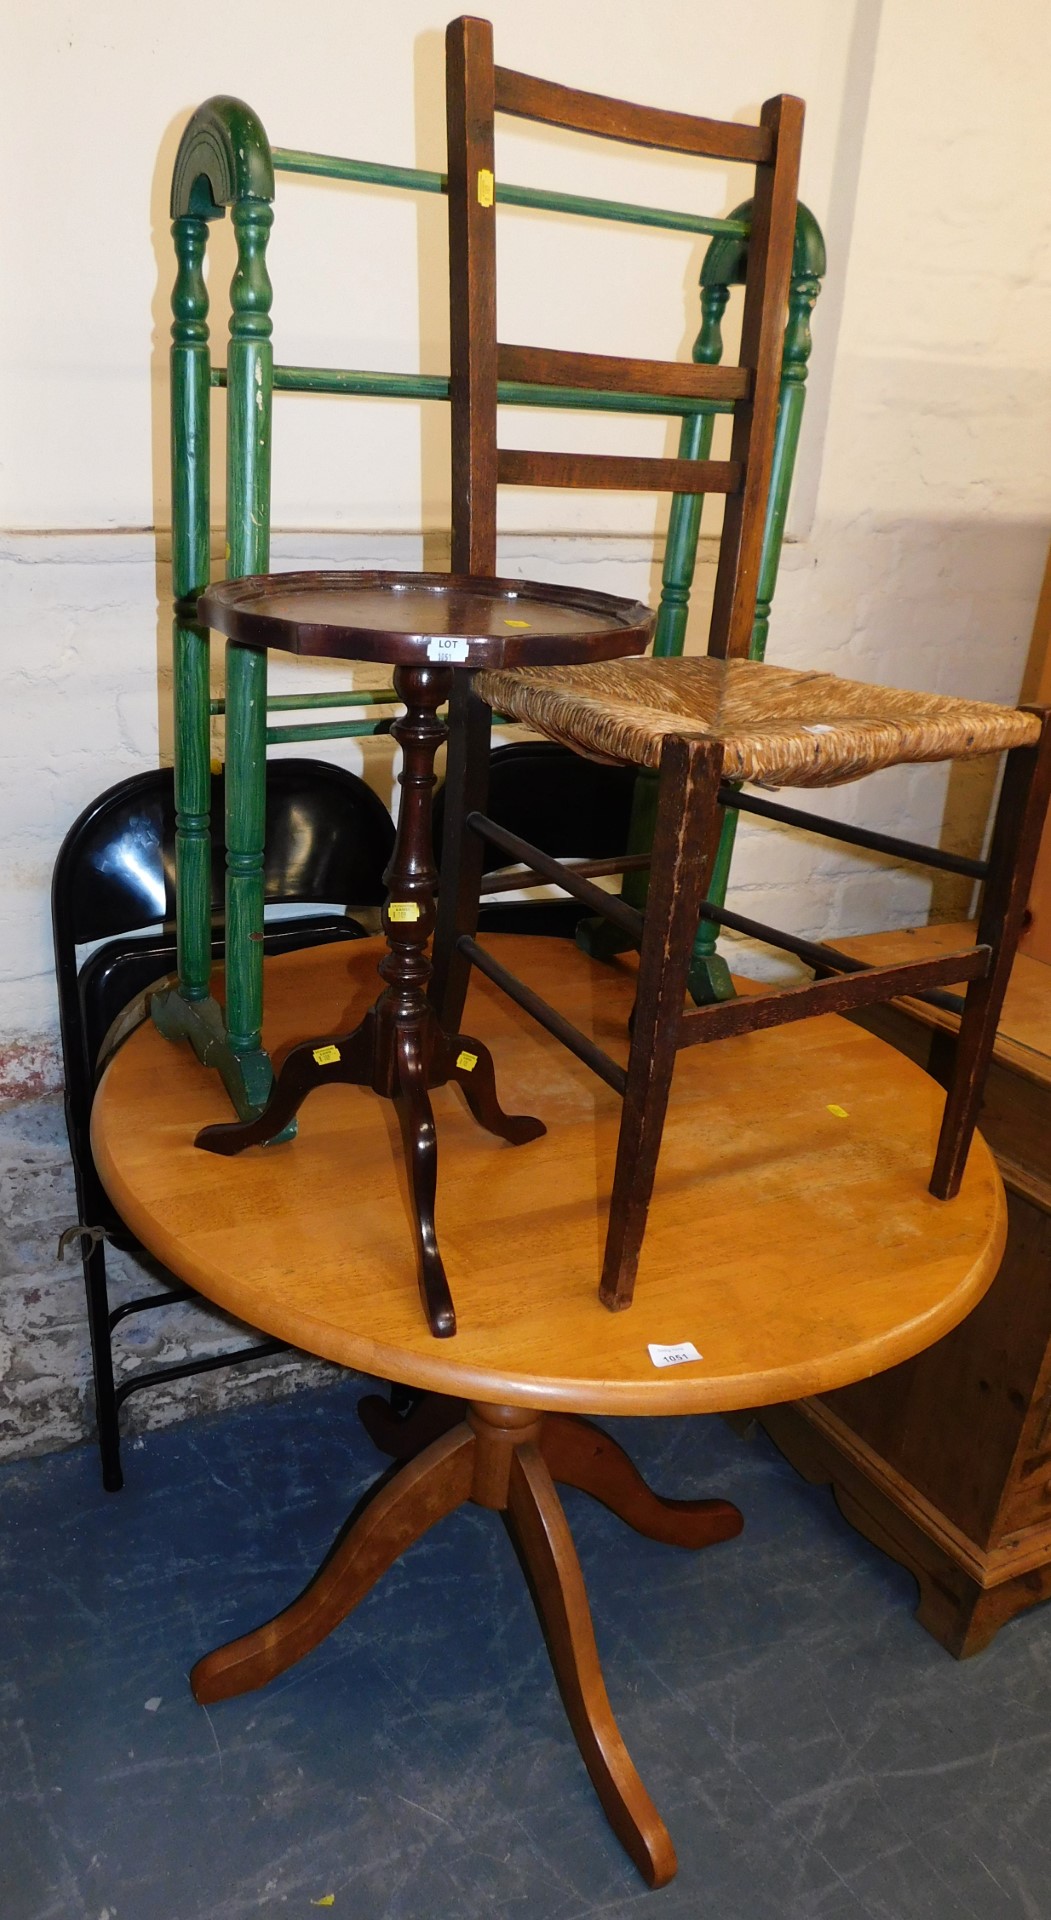 A circular pine kitchen table, a chair with rush seat, small occasional table, towel rail and two me